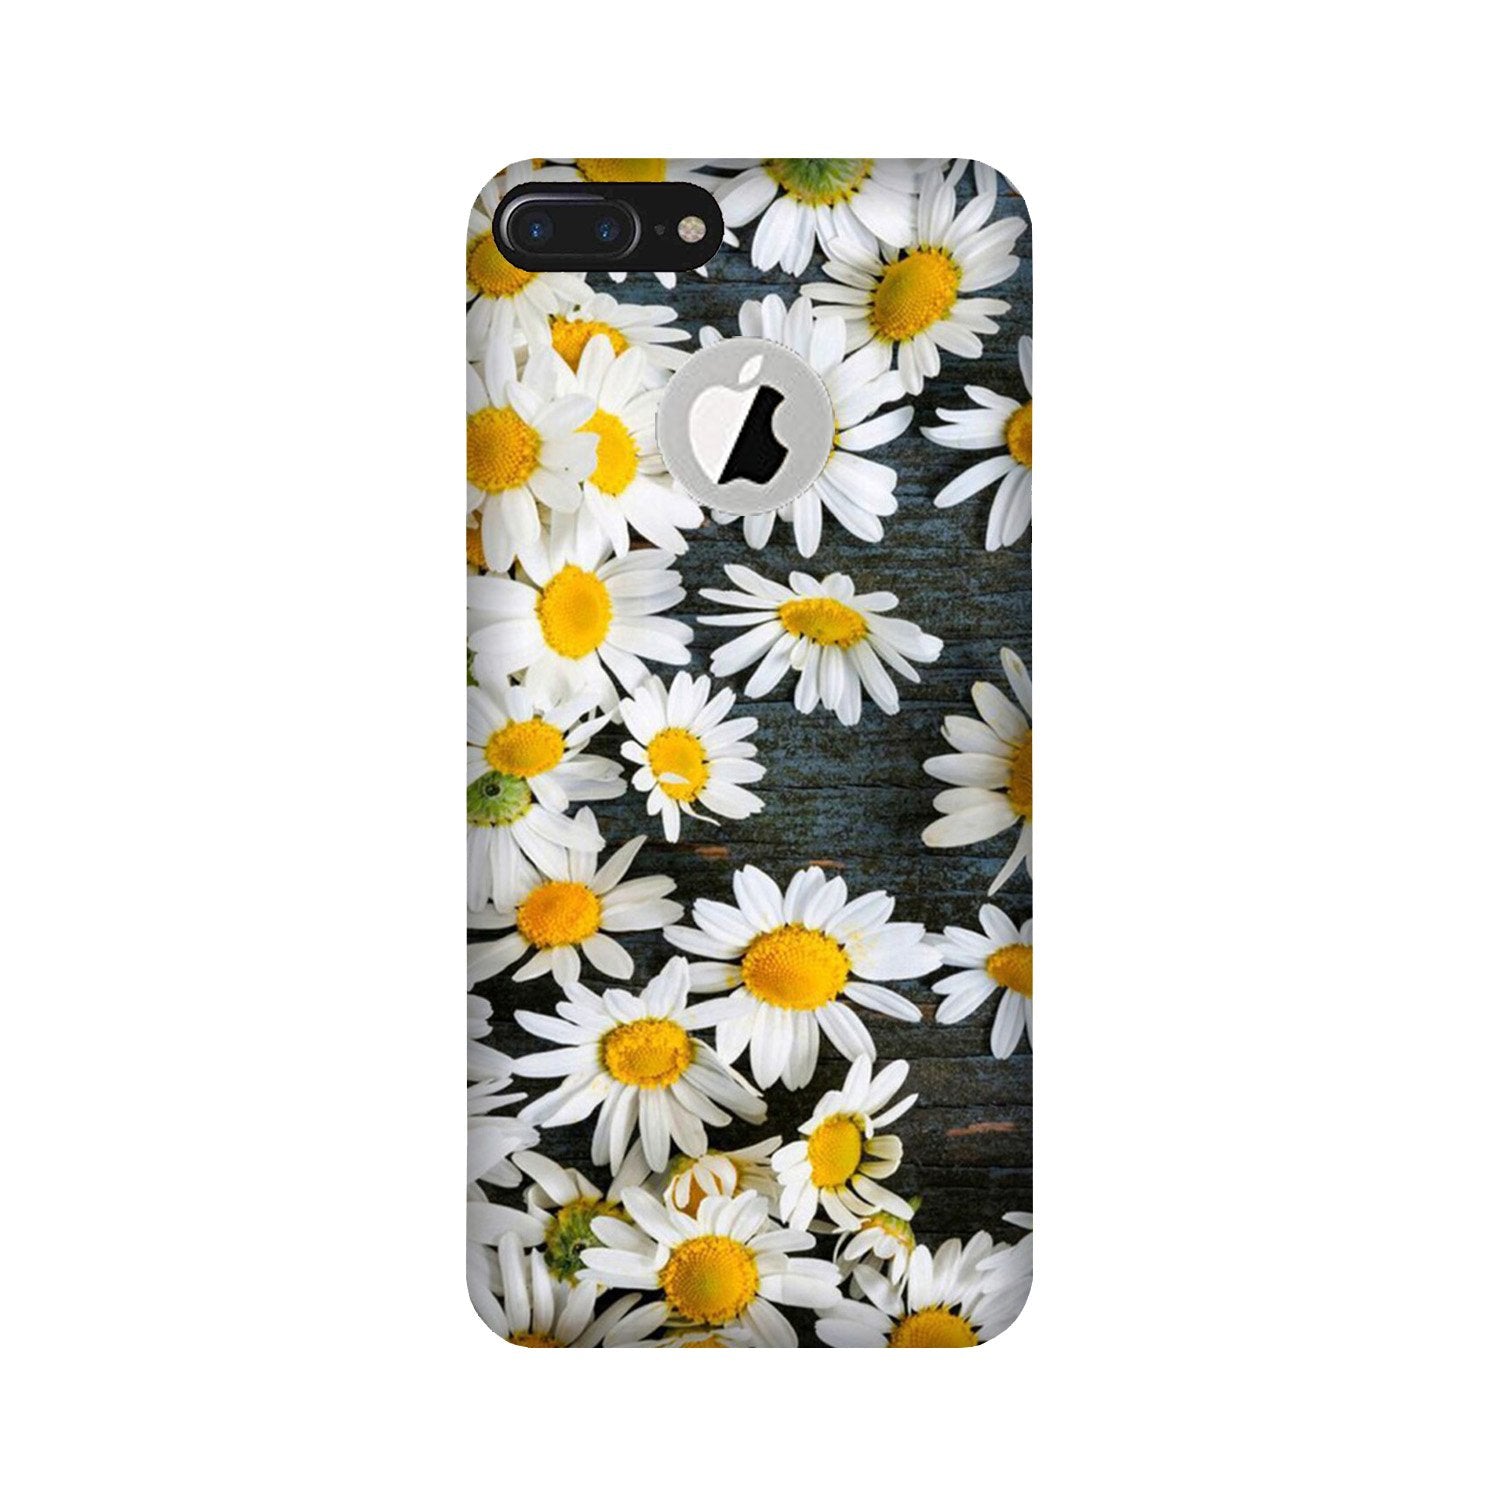 White flowers2 Case for iPhone 7 Plus logo cut